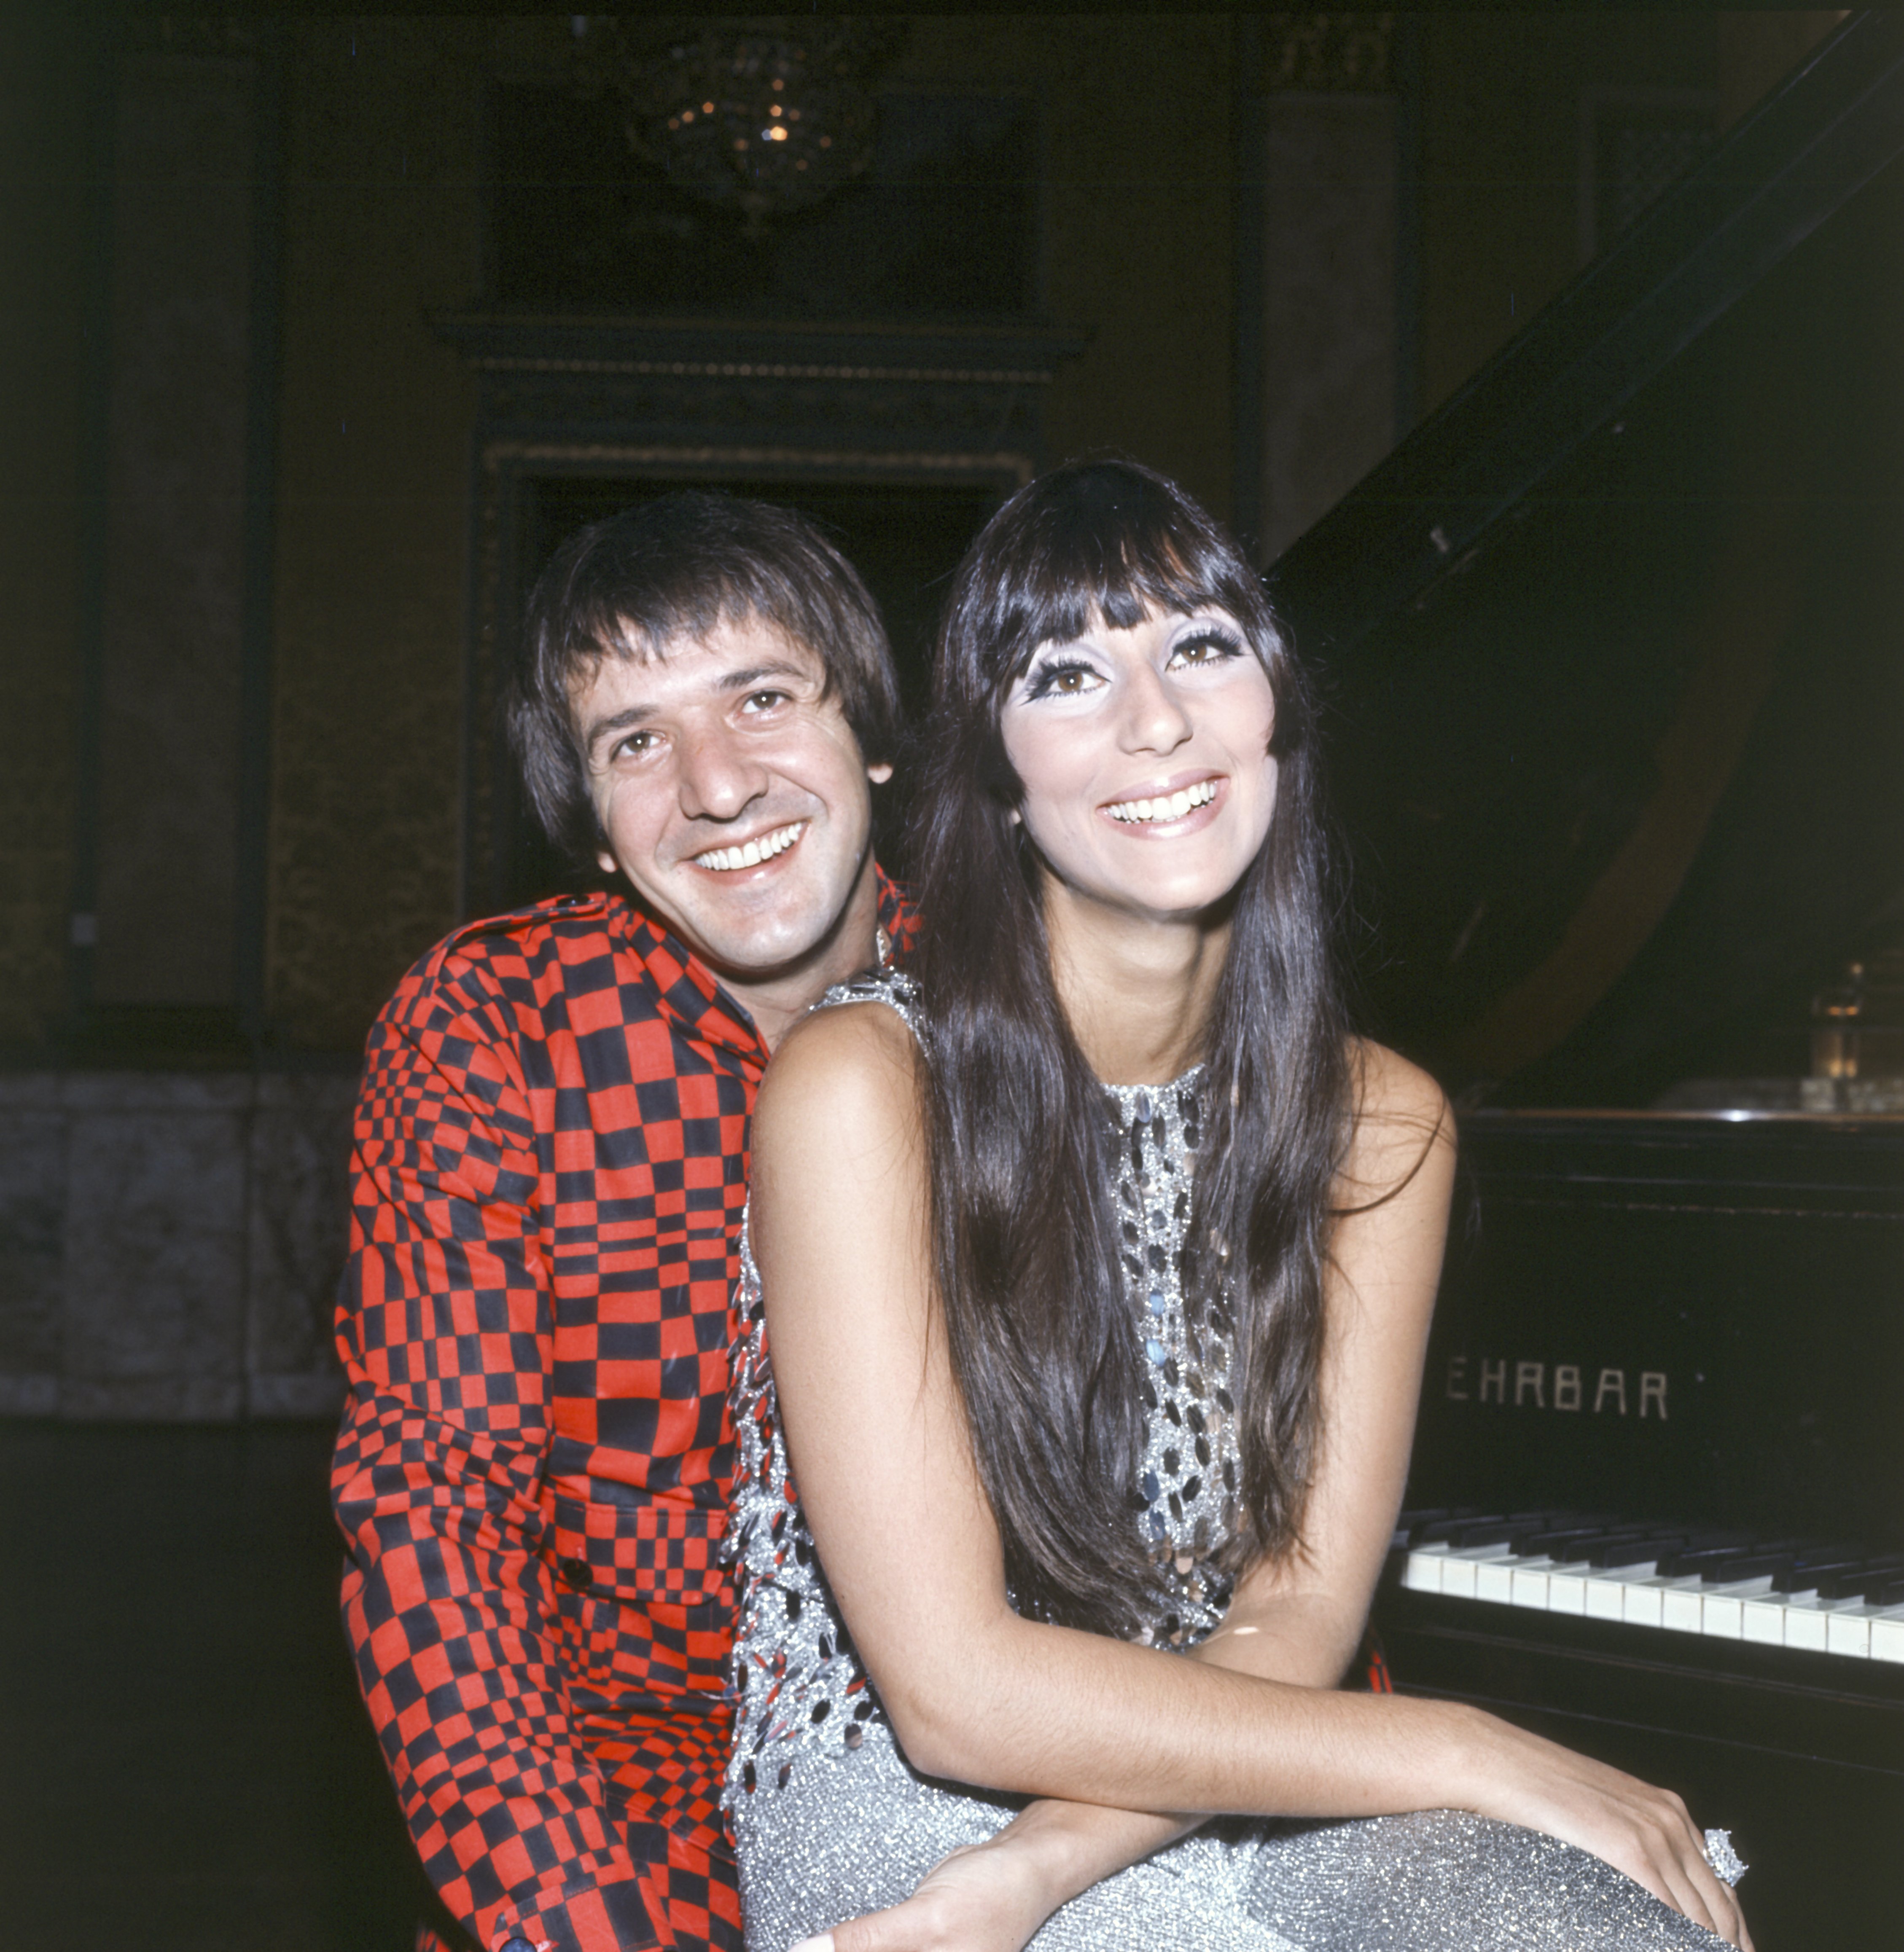 American singer Sonny Bono, with singer Cher; in Italy, circa 1966. | Source: Getty Images